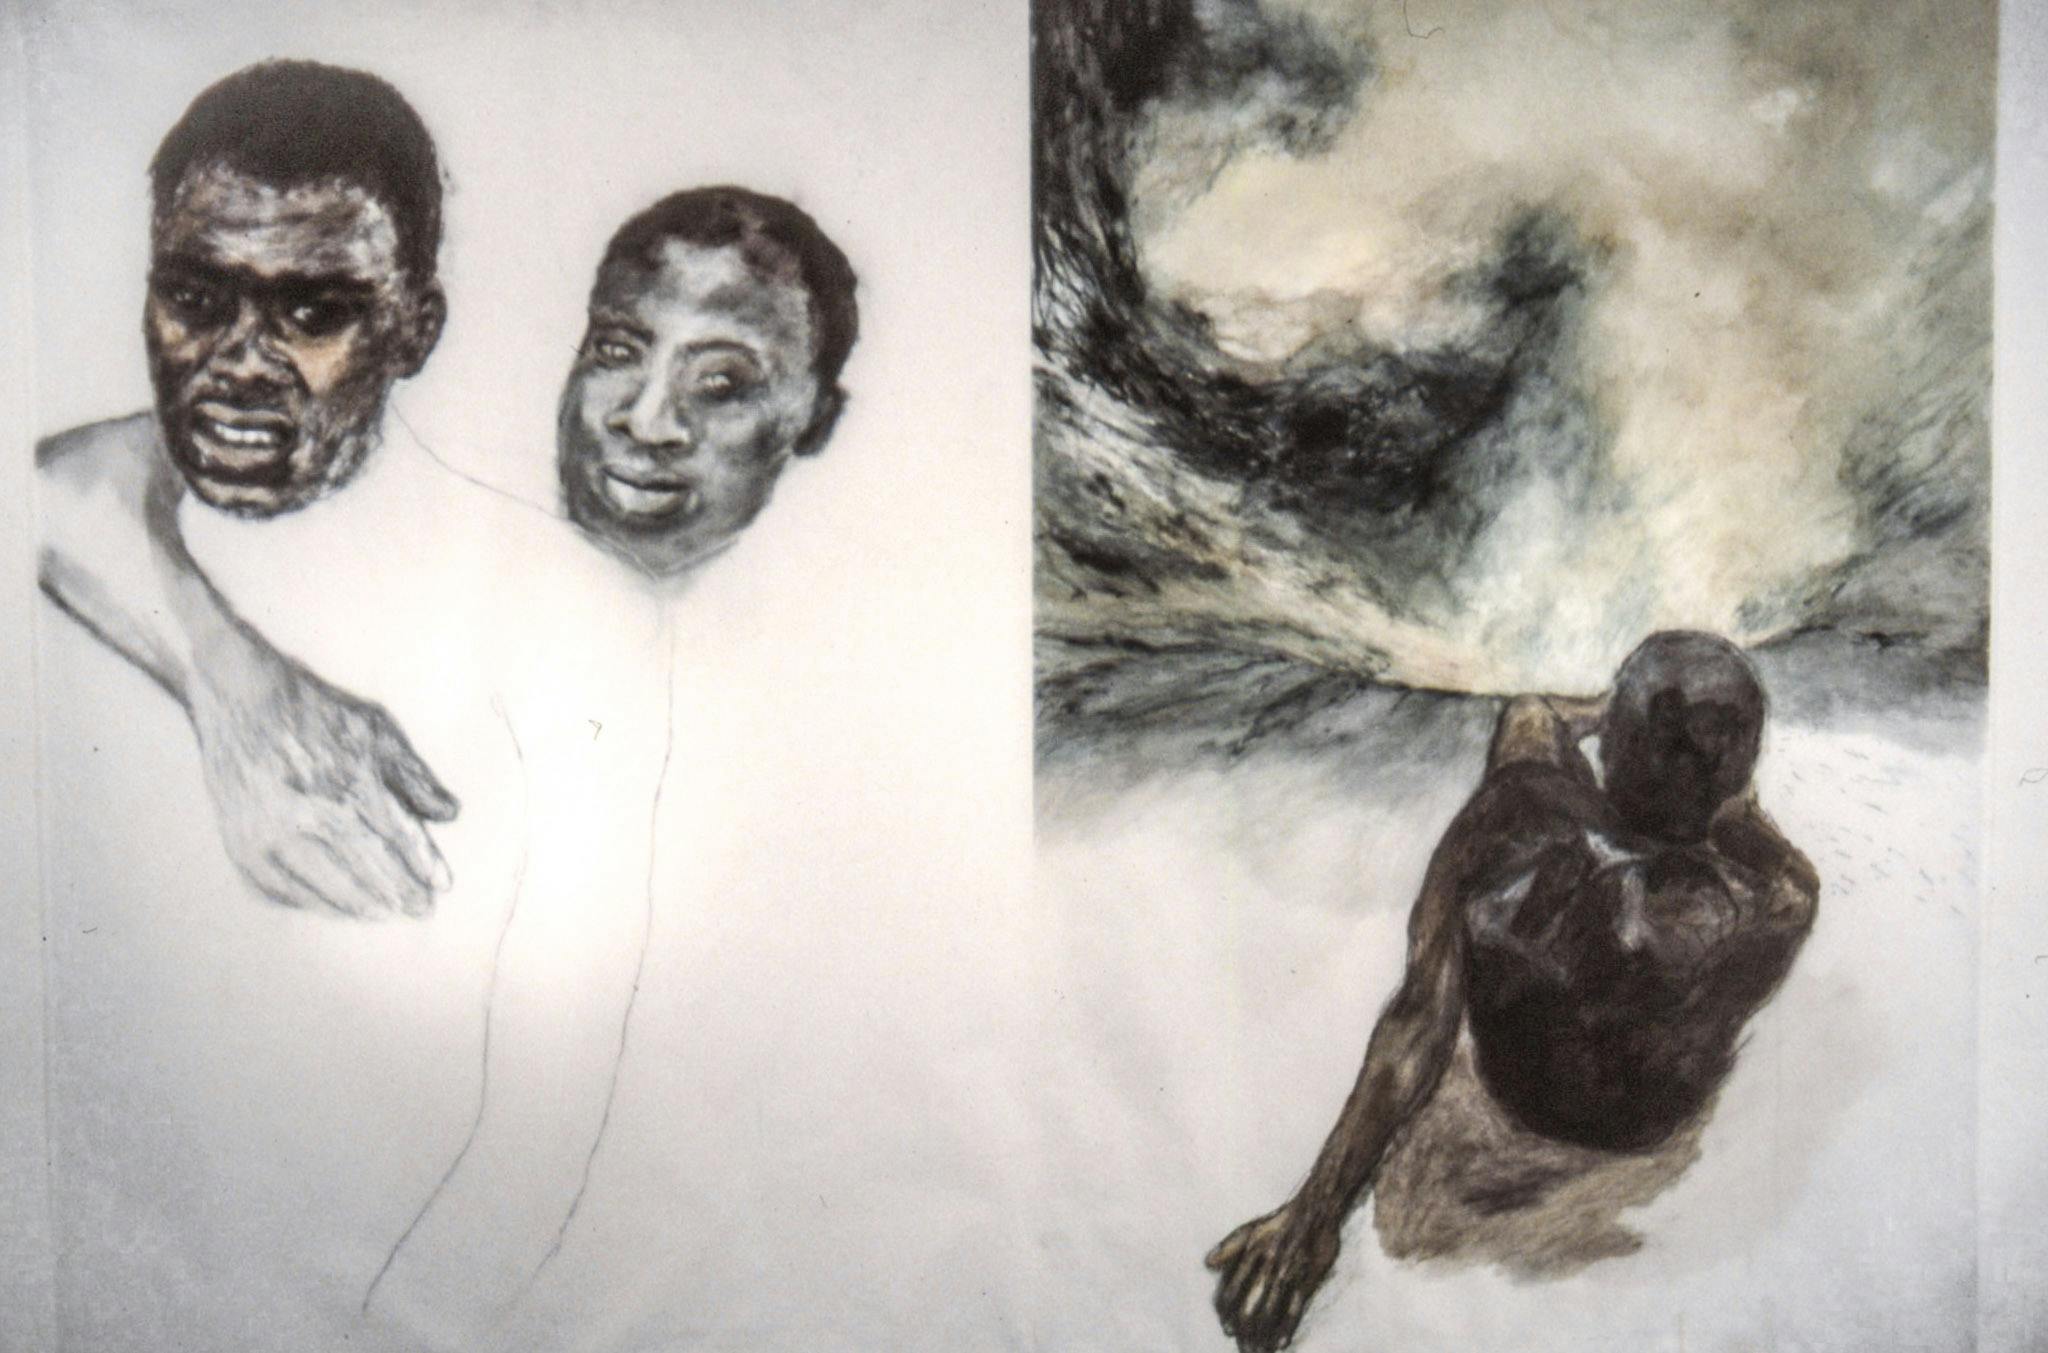 A closeup of a large drawing. One side of the drawing shows 2 faces of Black folks and a silhouette of their bodies, embracing. The other side shows a Black body sitting shirtless, facing a dark void.